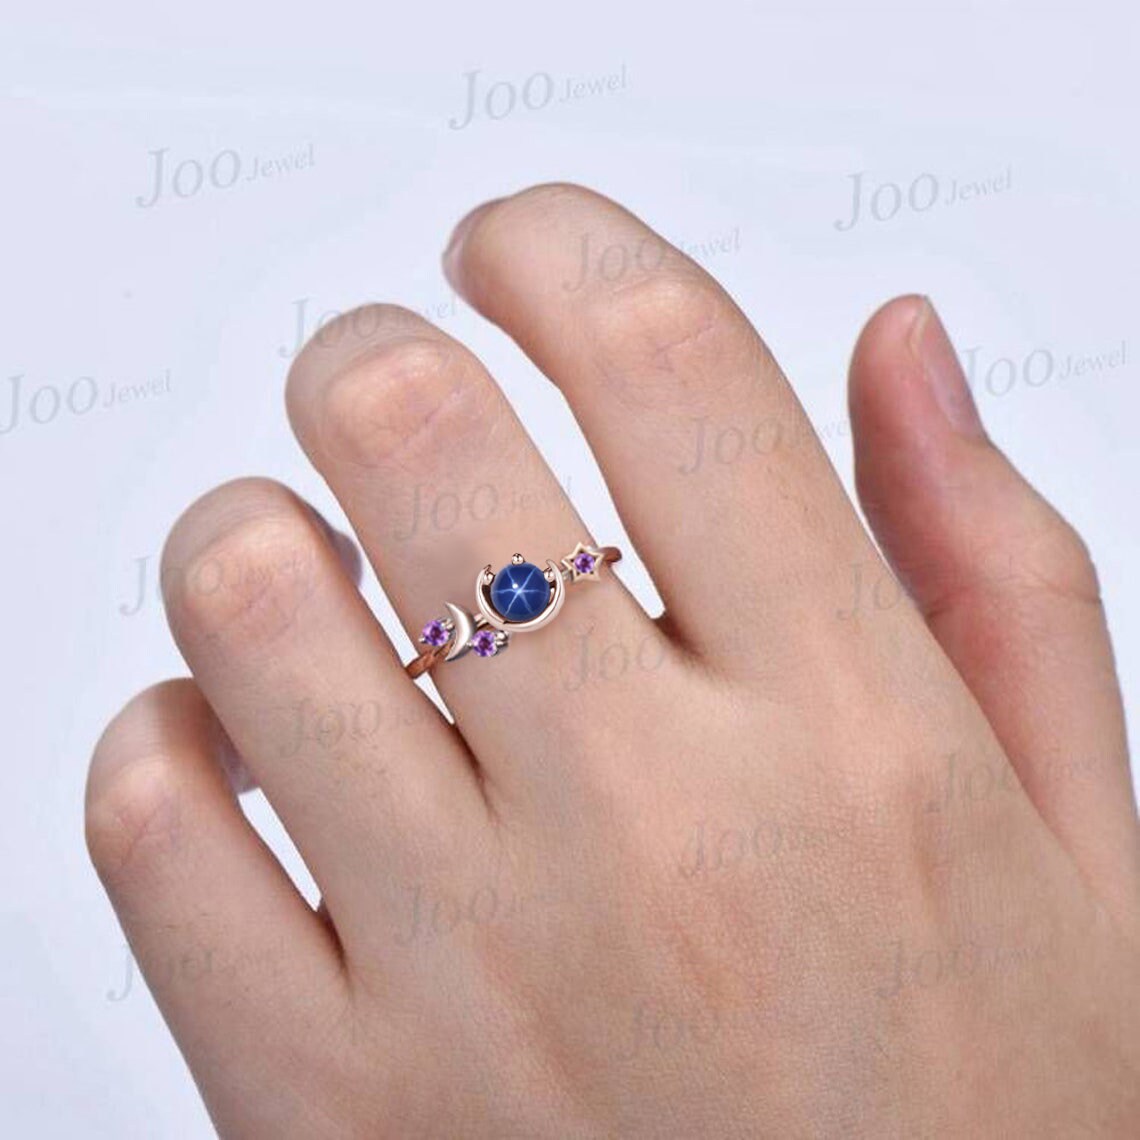 Moon Star Engagement Ring Unique Round Star Sapphire Wedding Rings 10K Rose Gold Purple Amethyst Crystal Celestial Ring Unique Promise Ring